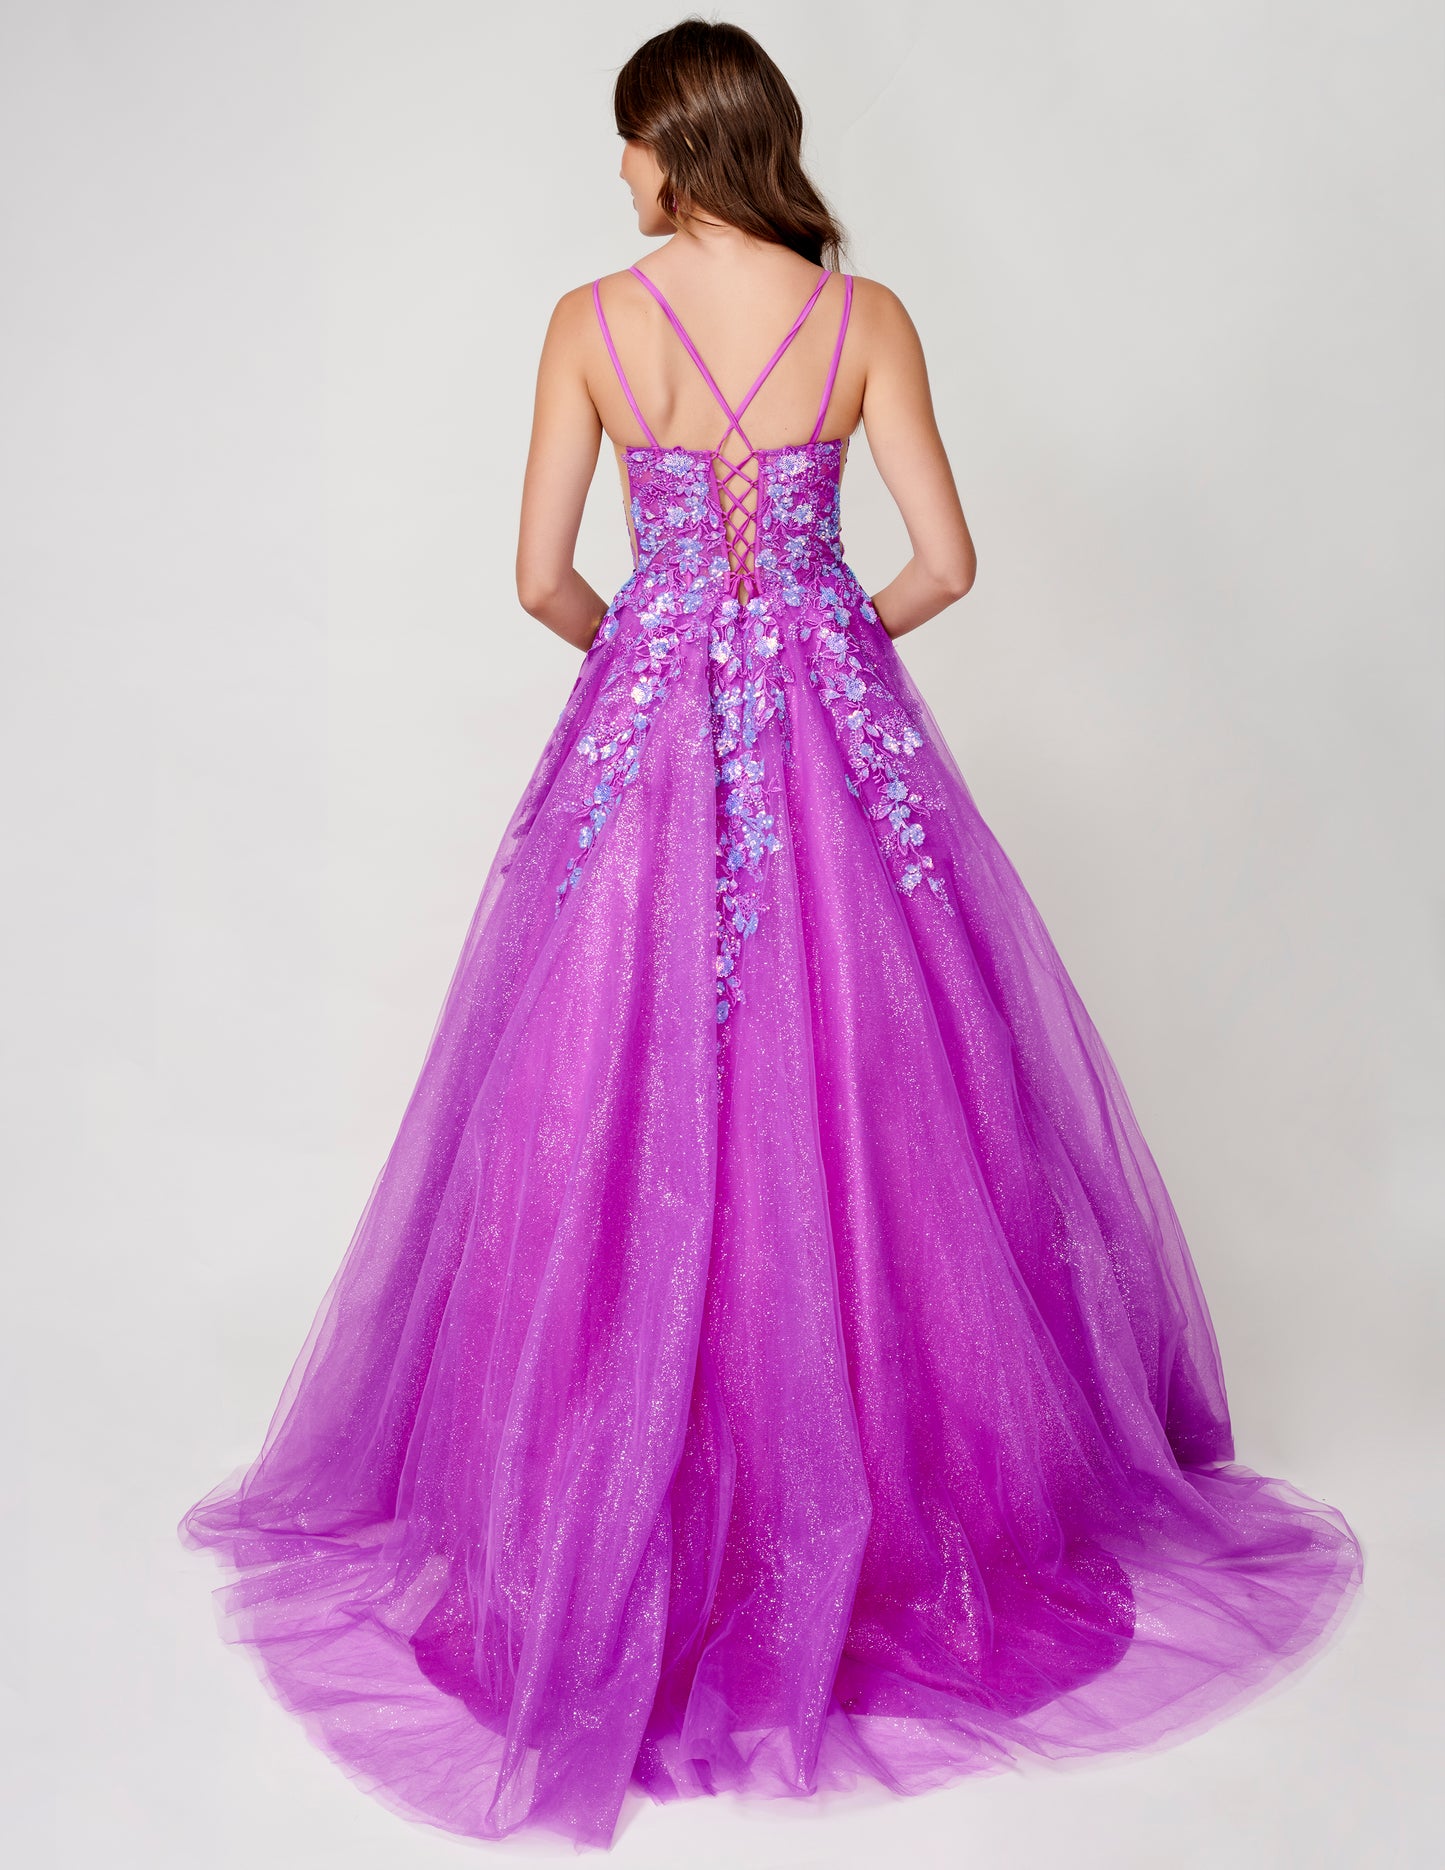 <p data-mce-fragment="1">Expertly crafted with sequin lace and a corset bodice, the Nina Canacci 3263 Prom Dress is a stunning choice for formal events. Its shimmering A-line silhouette and sheer details add a touch of elegance. Elevate your style with this timeless ball gown.</p> <p data-mce-fragment="1">Sizes: 0-14</p> <p data-mce-fragment="1">Colors: Purple, Turquoise</p>